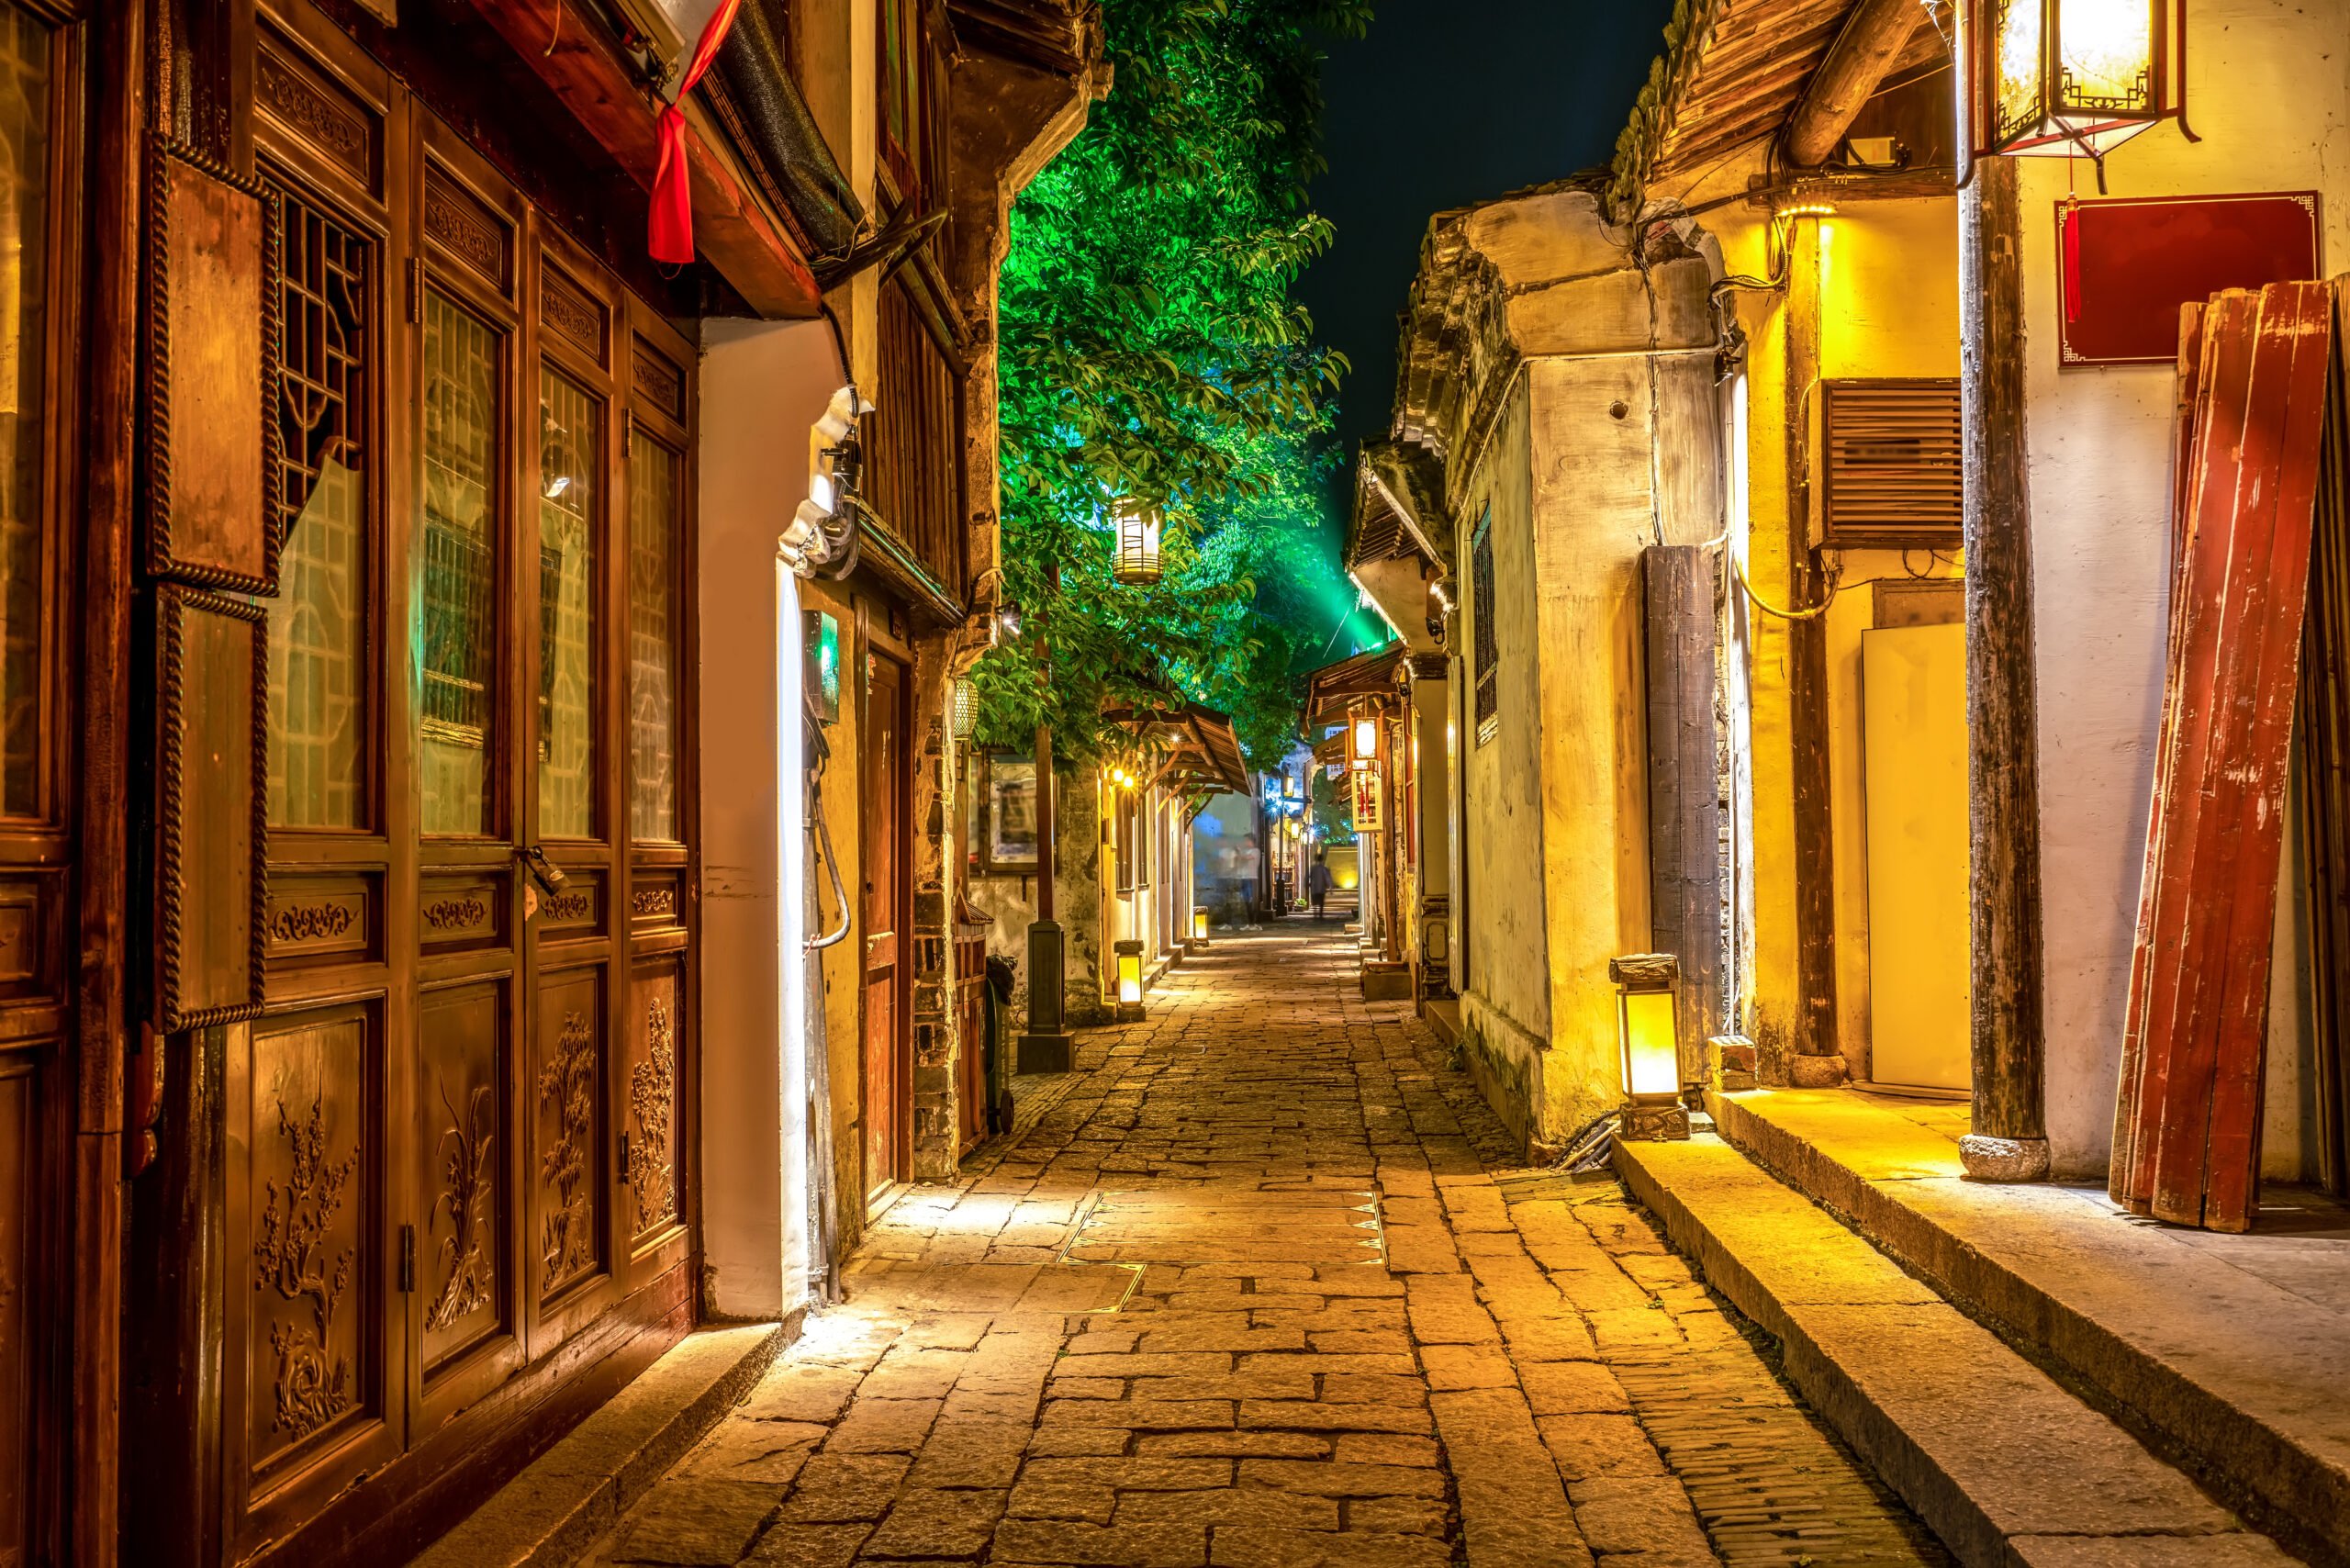 Discover The Wonderful Suzhou Alleyway In Our Suzhou Alleyway Walking Food Tour